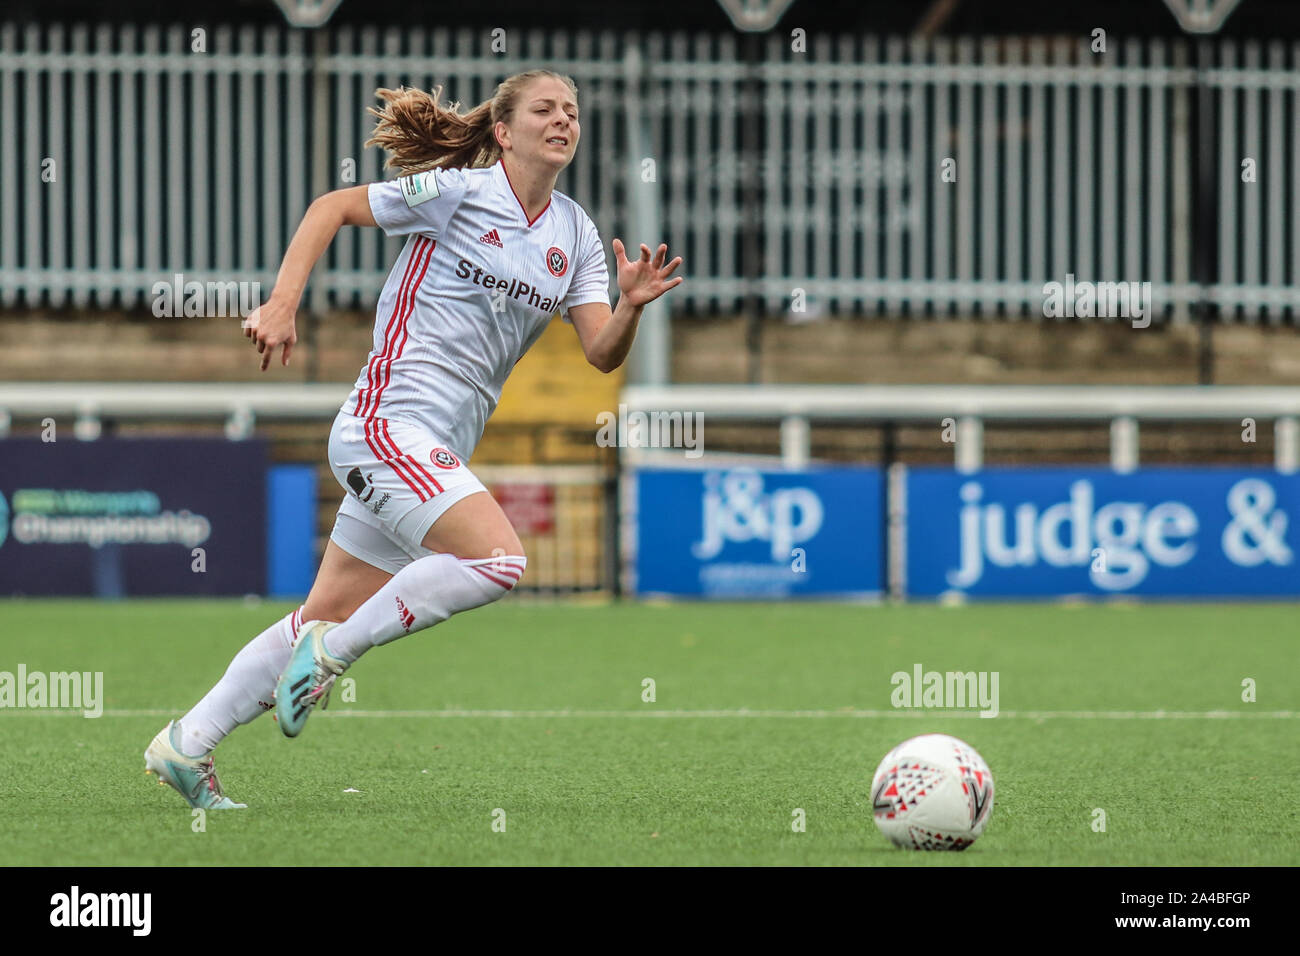 Bromley, UK. 13th Oct, 2019. LONDON, UNITED KINGDOM OCTOBER 13. Jade Pennock of Sheffield United Women during FA Women's Championship between Crystal Palace and Sheffield United at Hayes Lane Stadium, Bromley, UK on 13 October 2019 Credit: Action Foto Sport/Alamy Live News Stock Photo